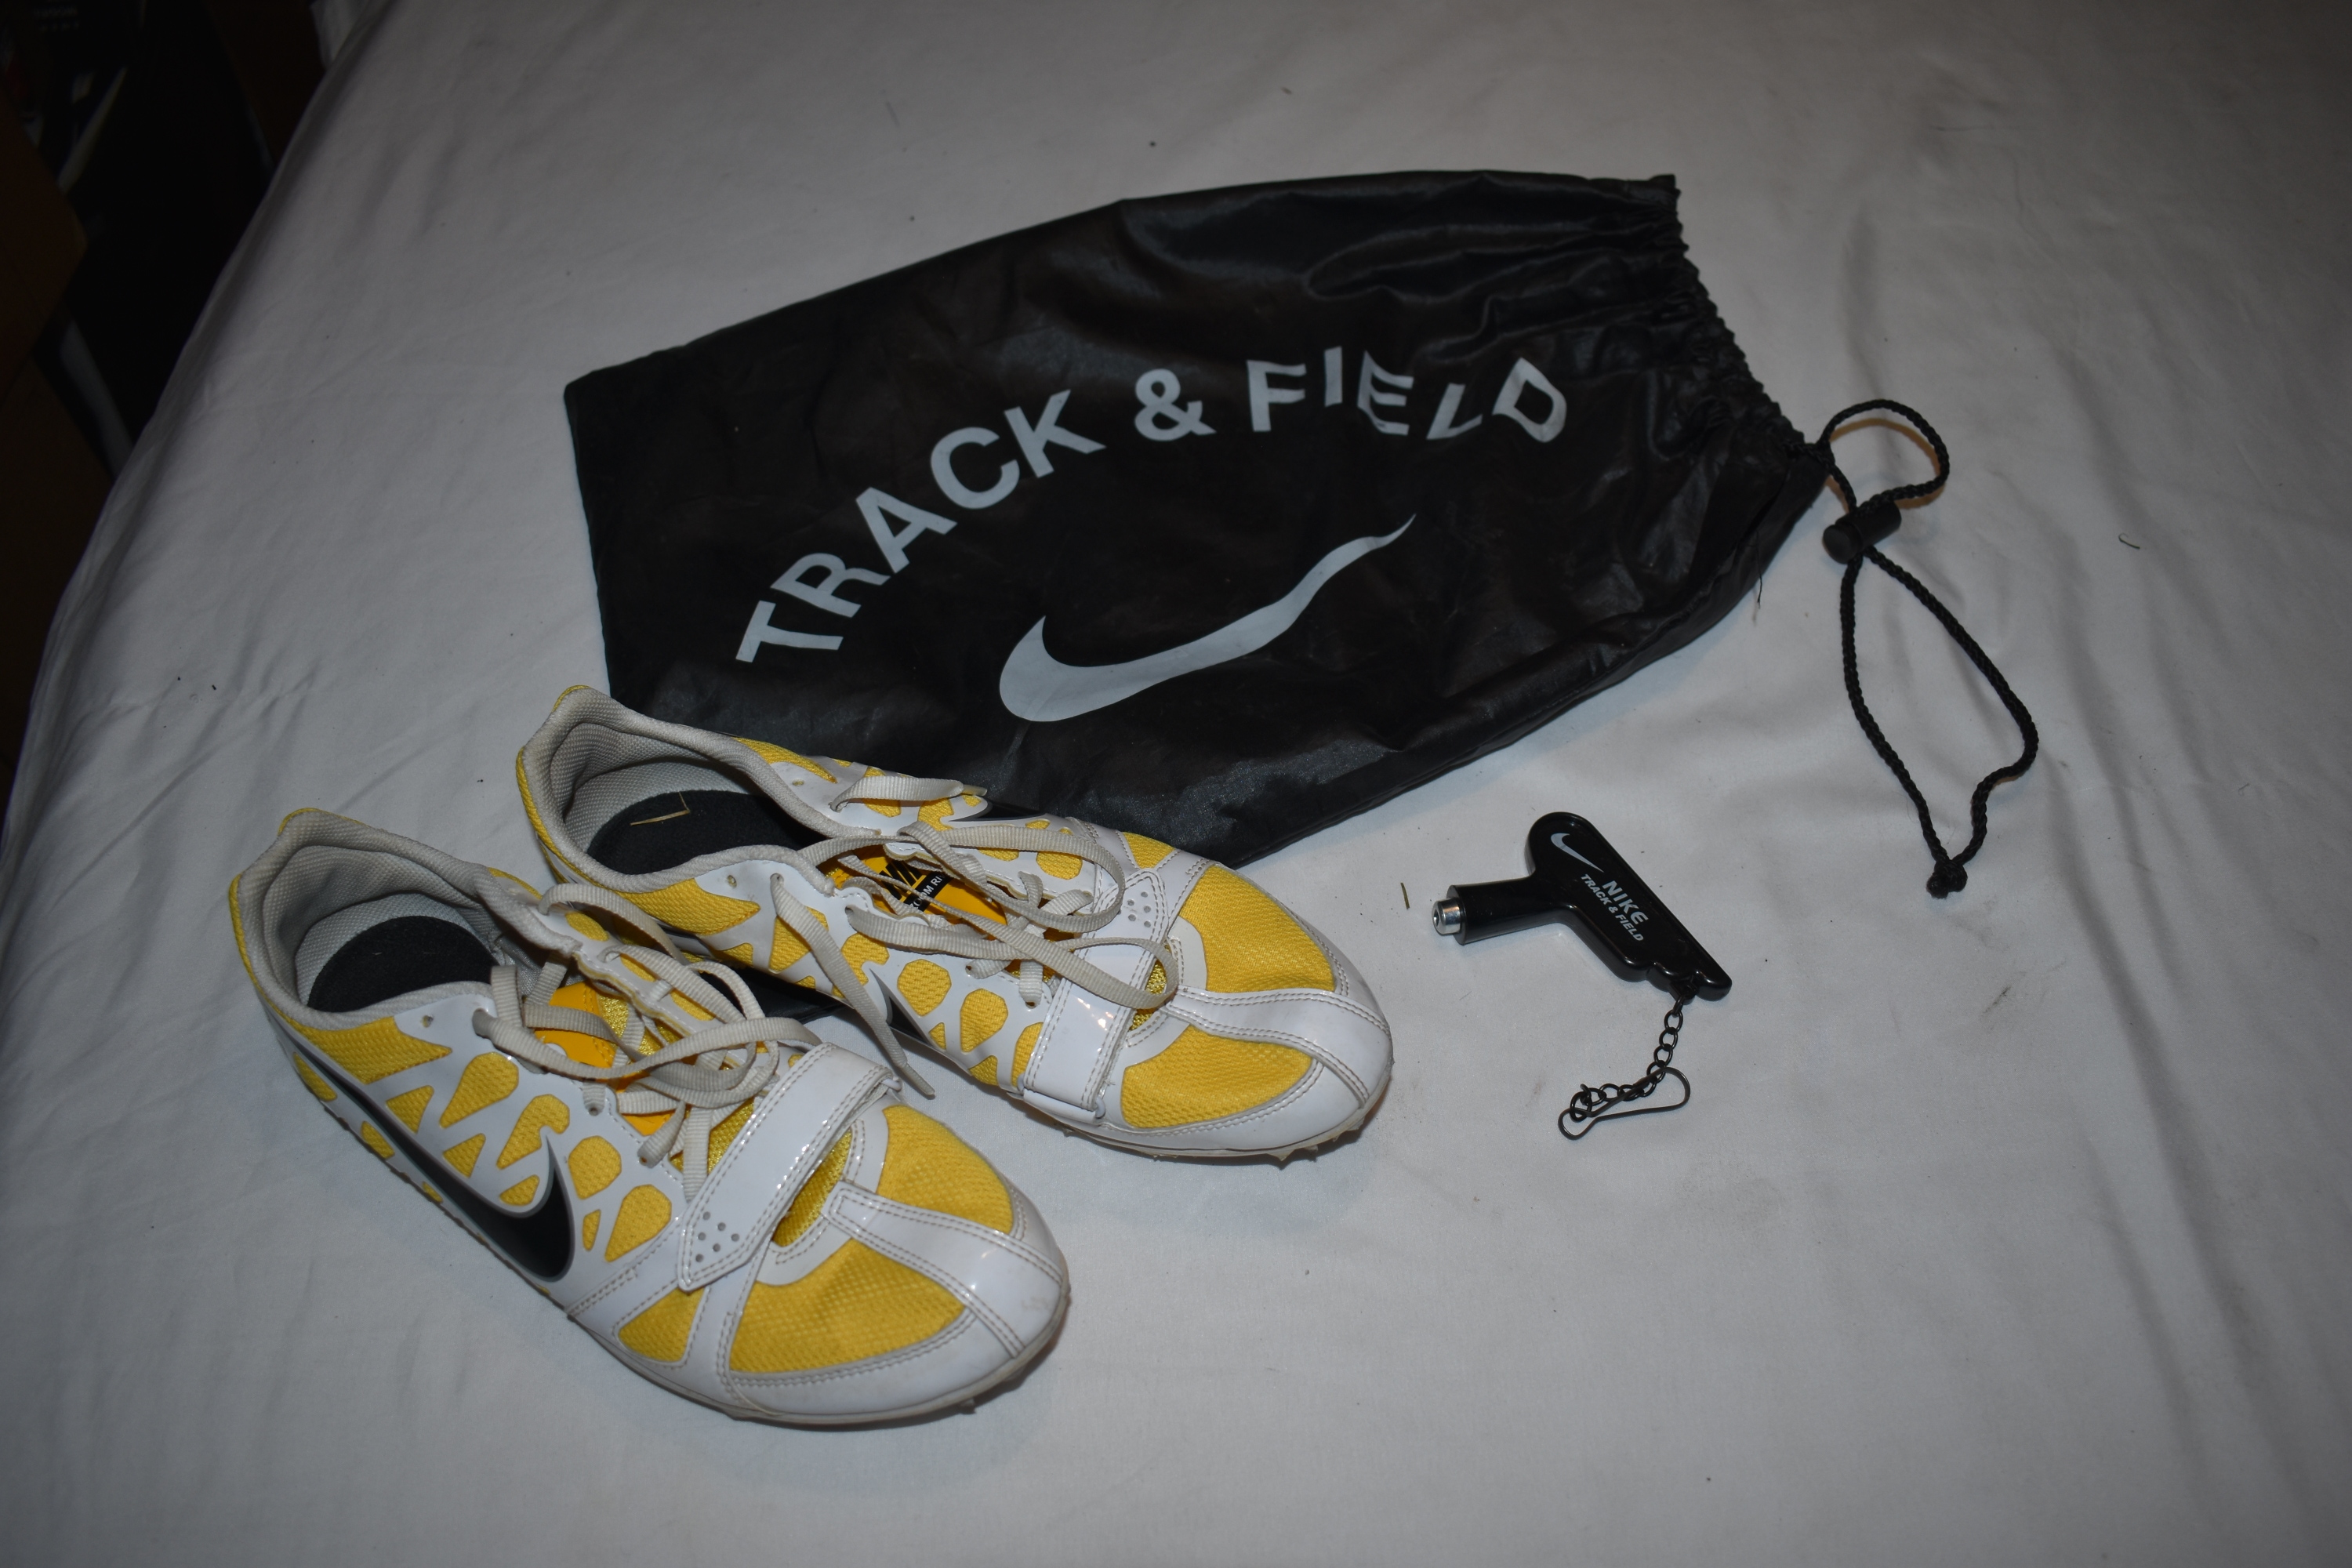 Nike Track & Field Spikes/Cleats w/Bag and tool, White/Yellow, Size 7.5